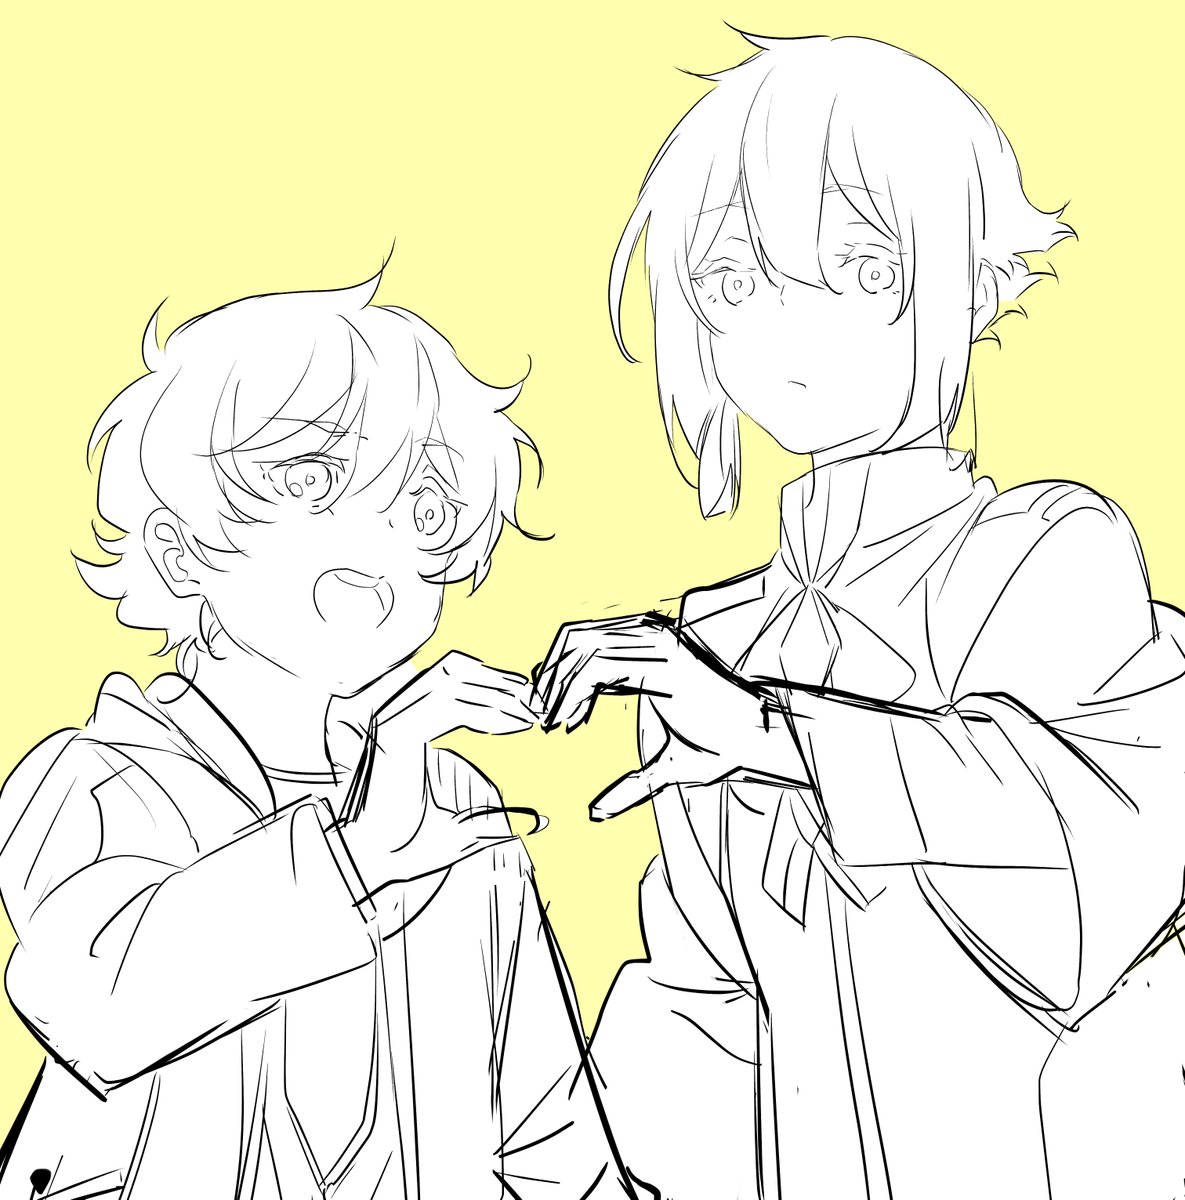 2boys multiple boys heart hands yellow background male focus heart hands duo jacket  illustration images